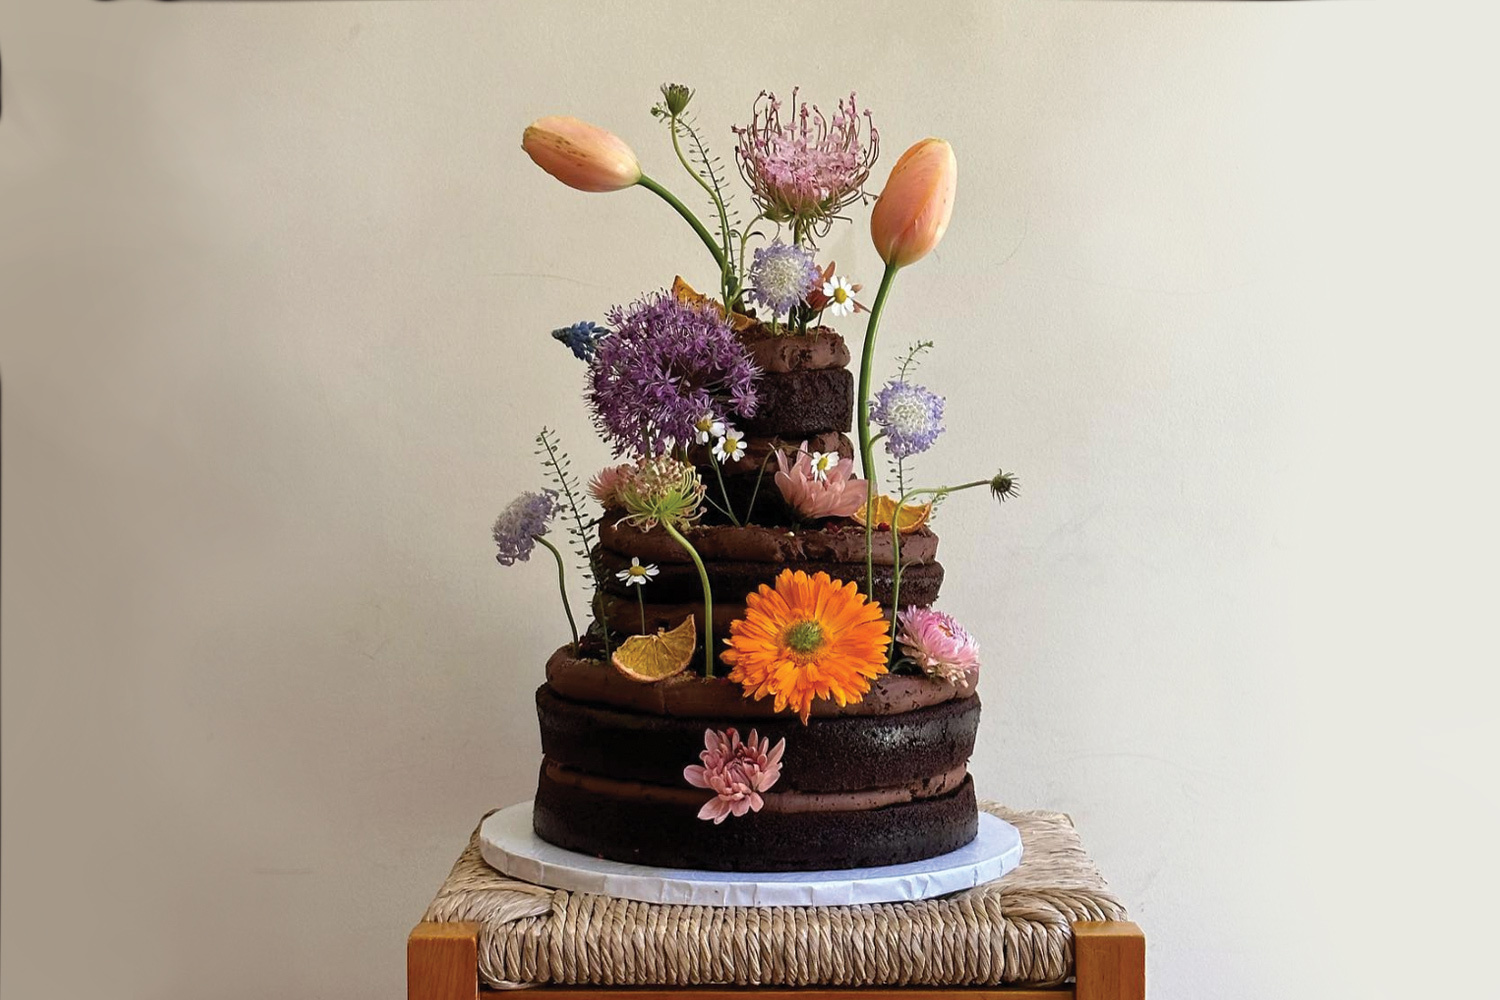 Full-size cakes are available for pre-order and will be decorated with seasonal flowers. 